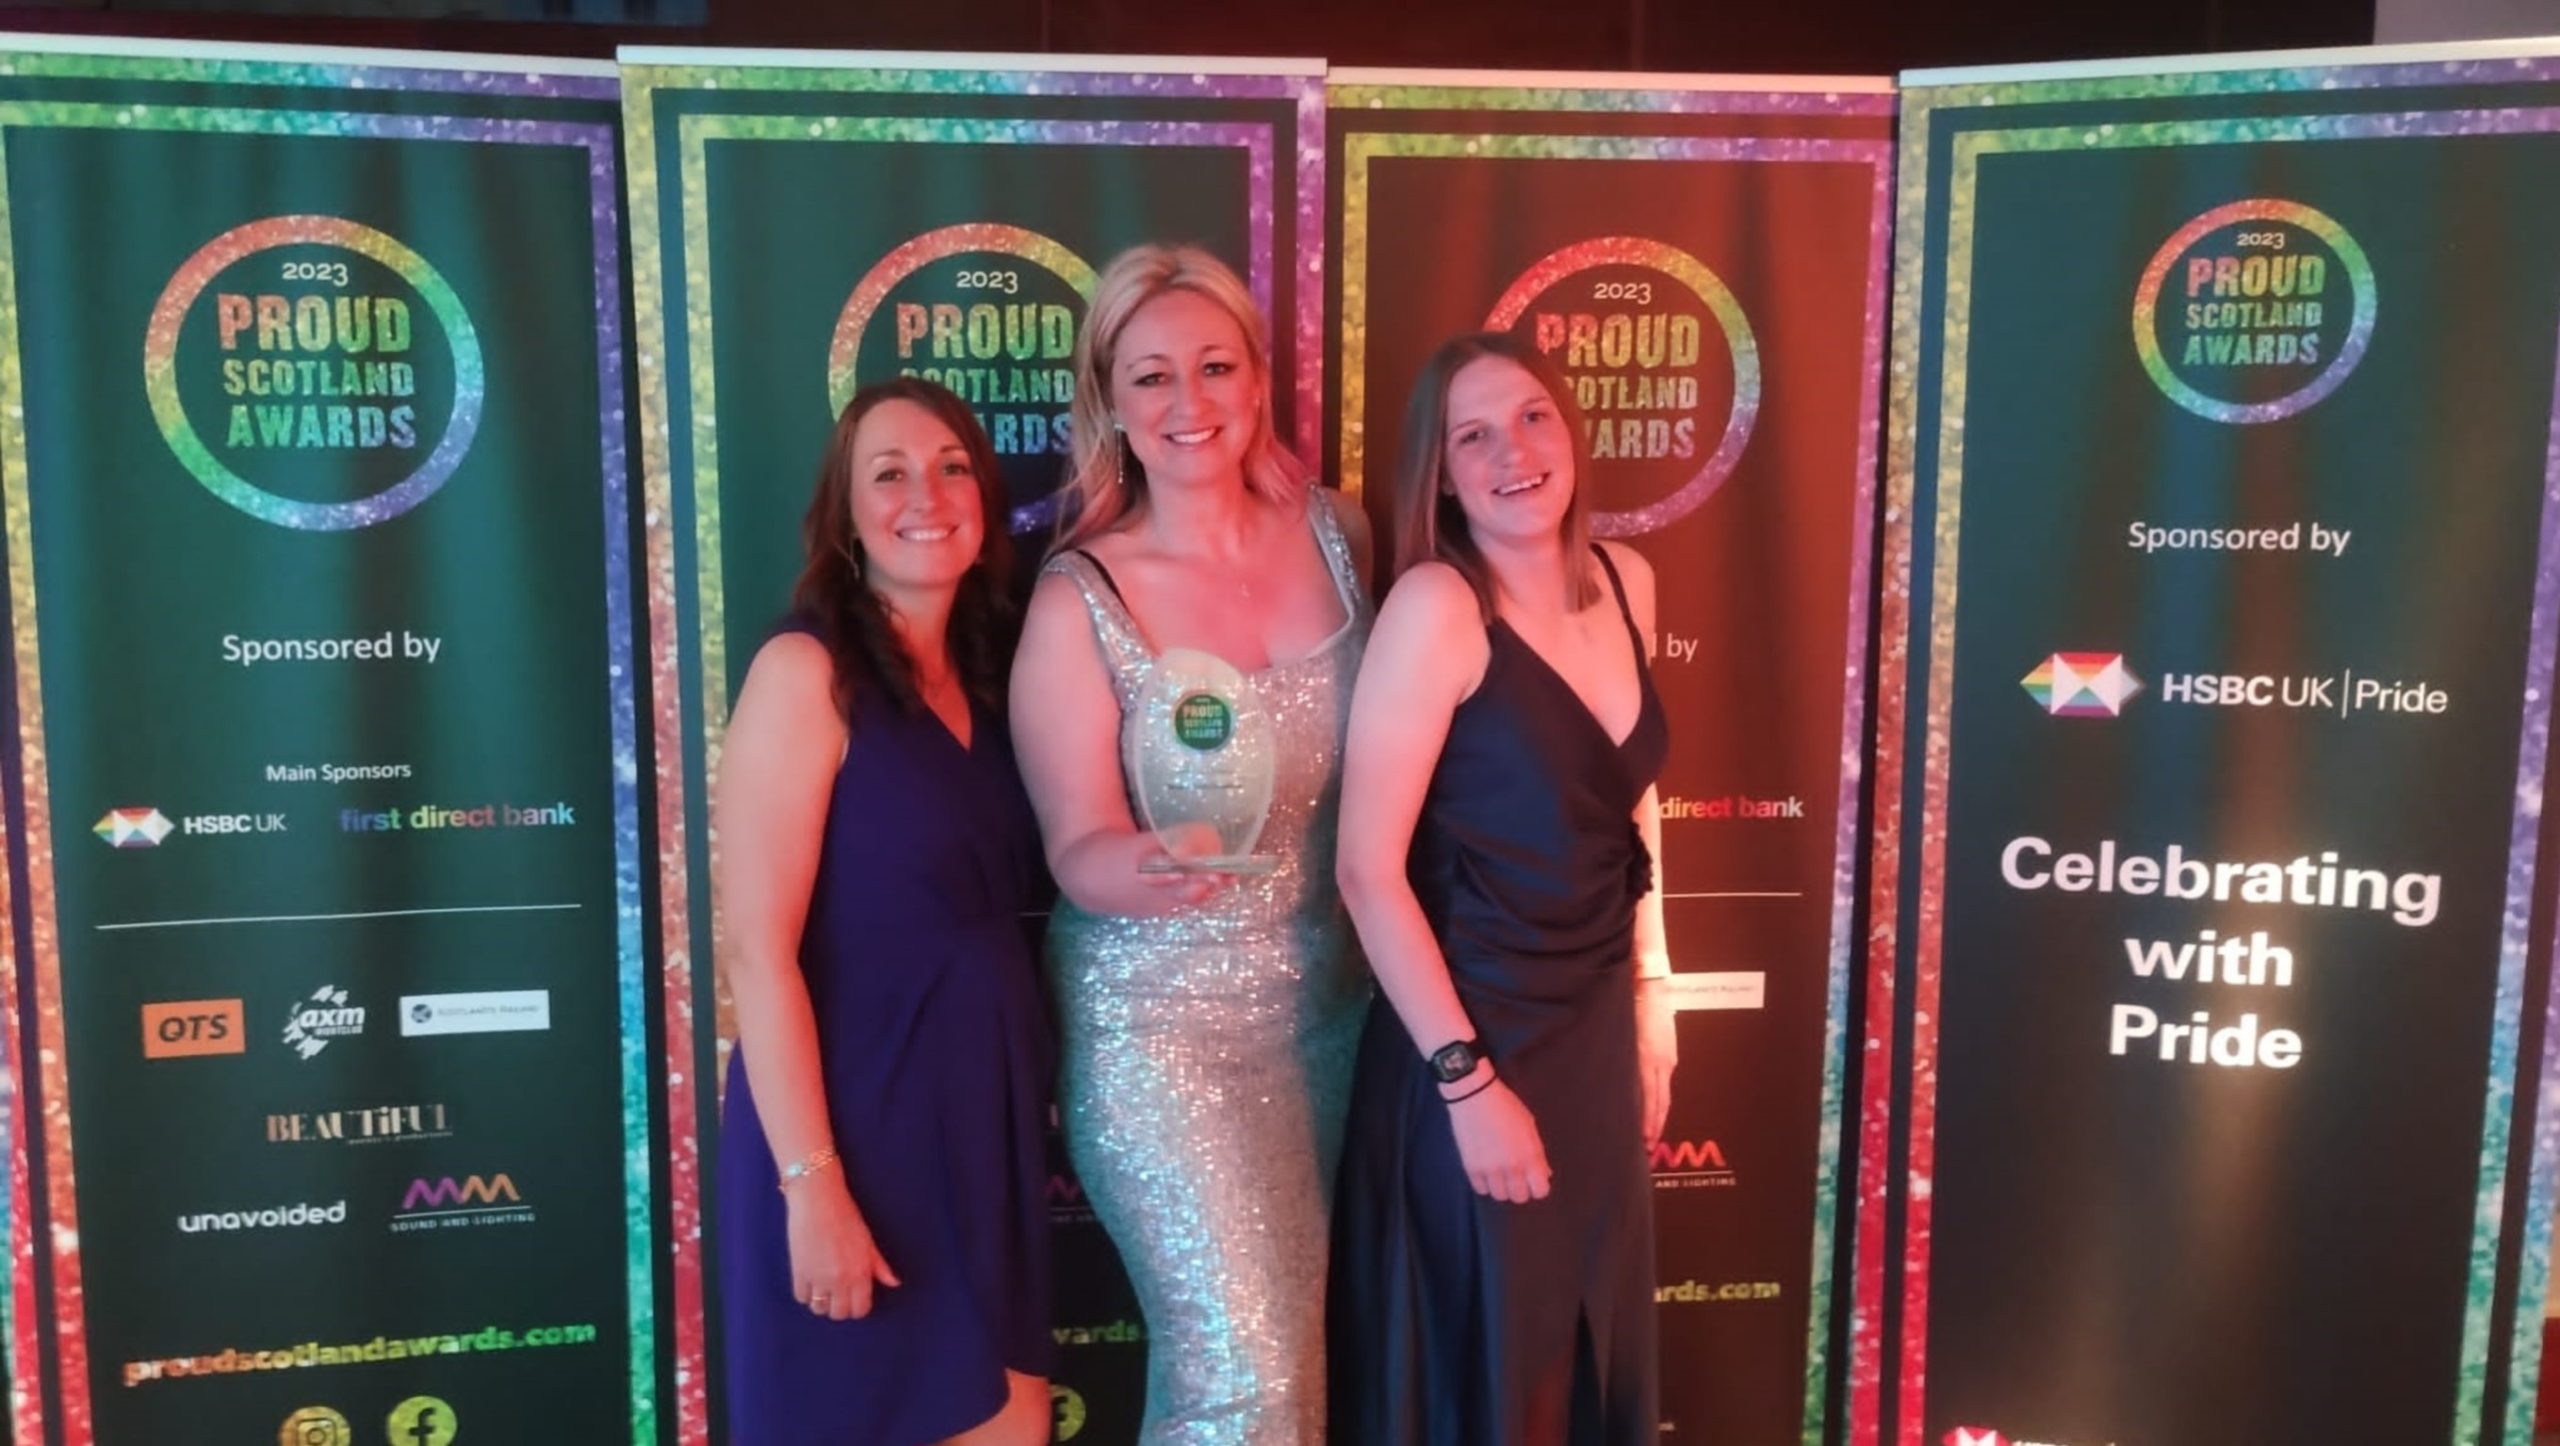 3 female members of staff holding award at Proud Scotland